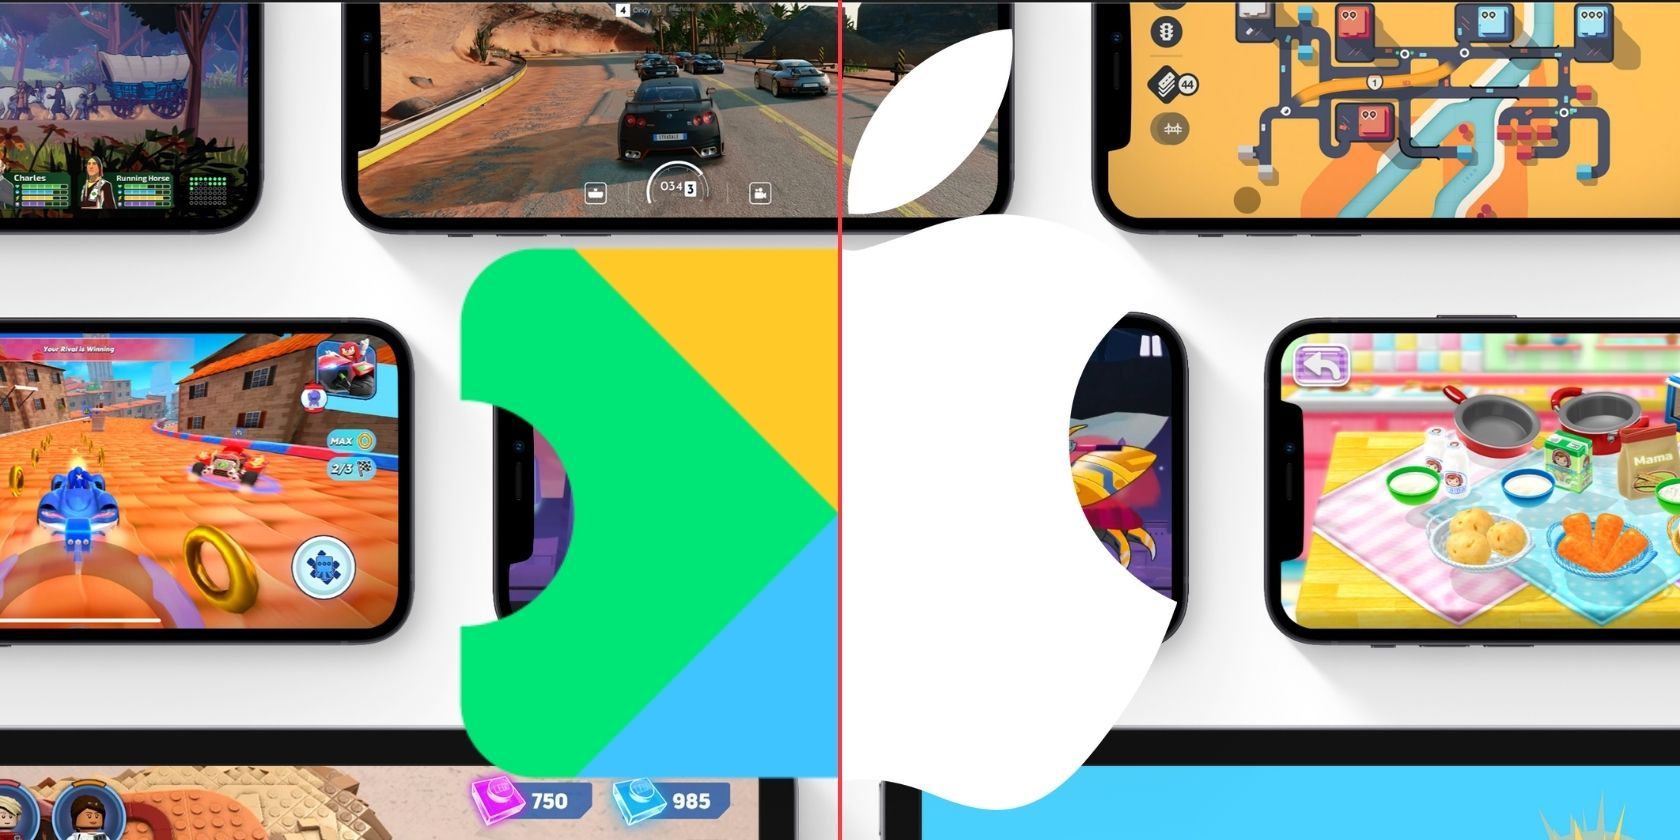 Apple Arcade and Google Play Pass Logo on background of Mobile Devices playing games